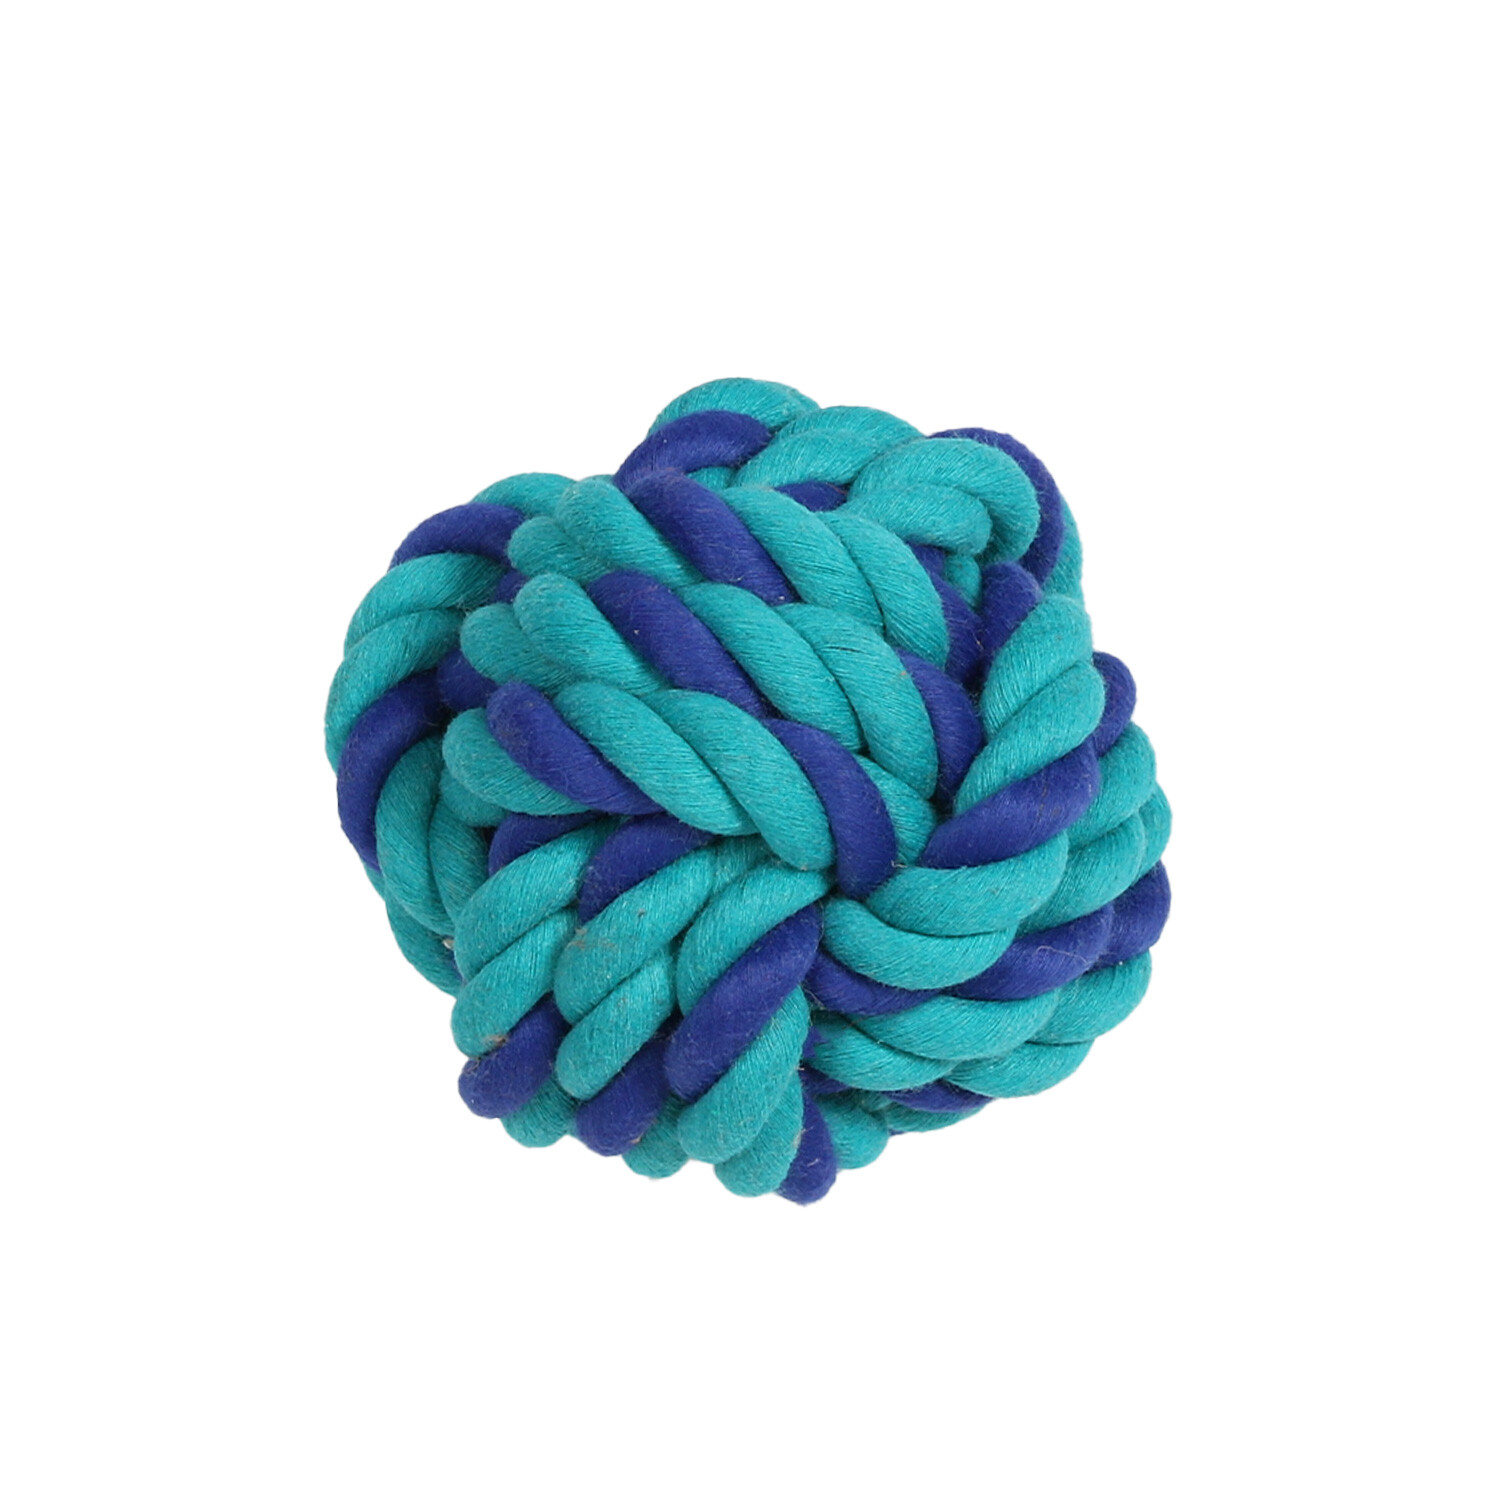 Rope Knot Ball - Small Image 3